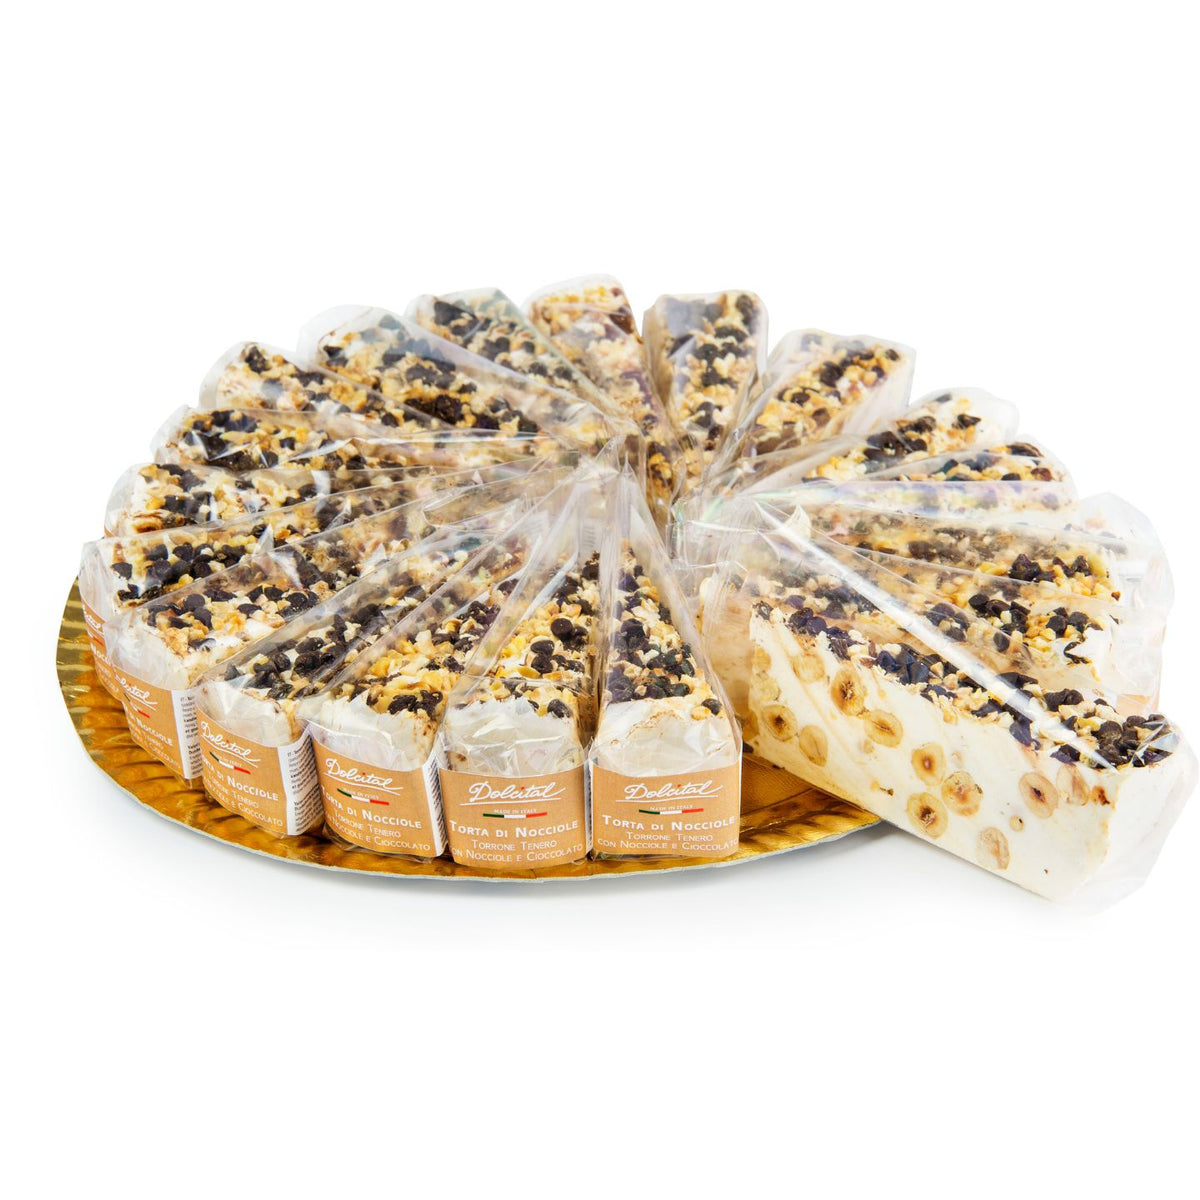 Dolcital Soft Nougat Cake with Chocolate &amp; Hazelnuts 20x110g  | Imported and distributed in the UK by Just Gourmet Foods